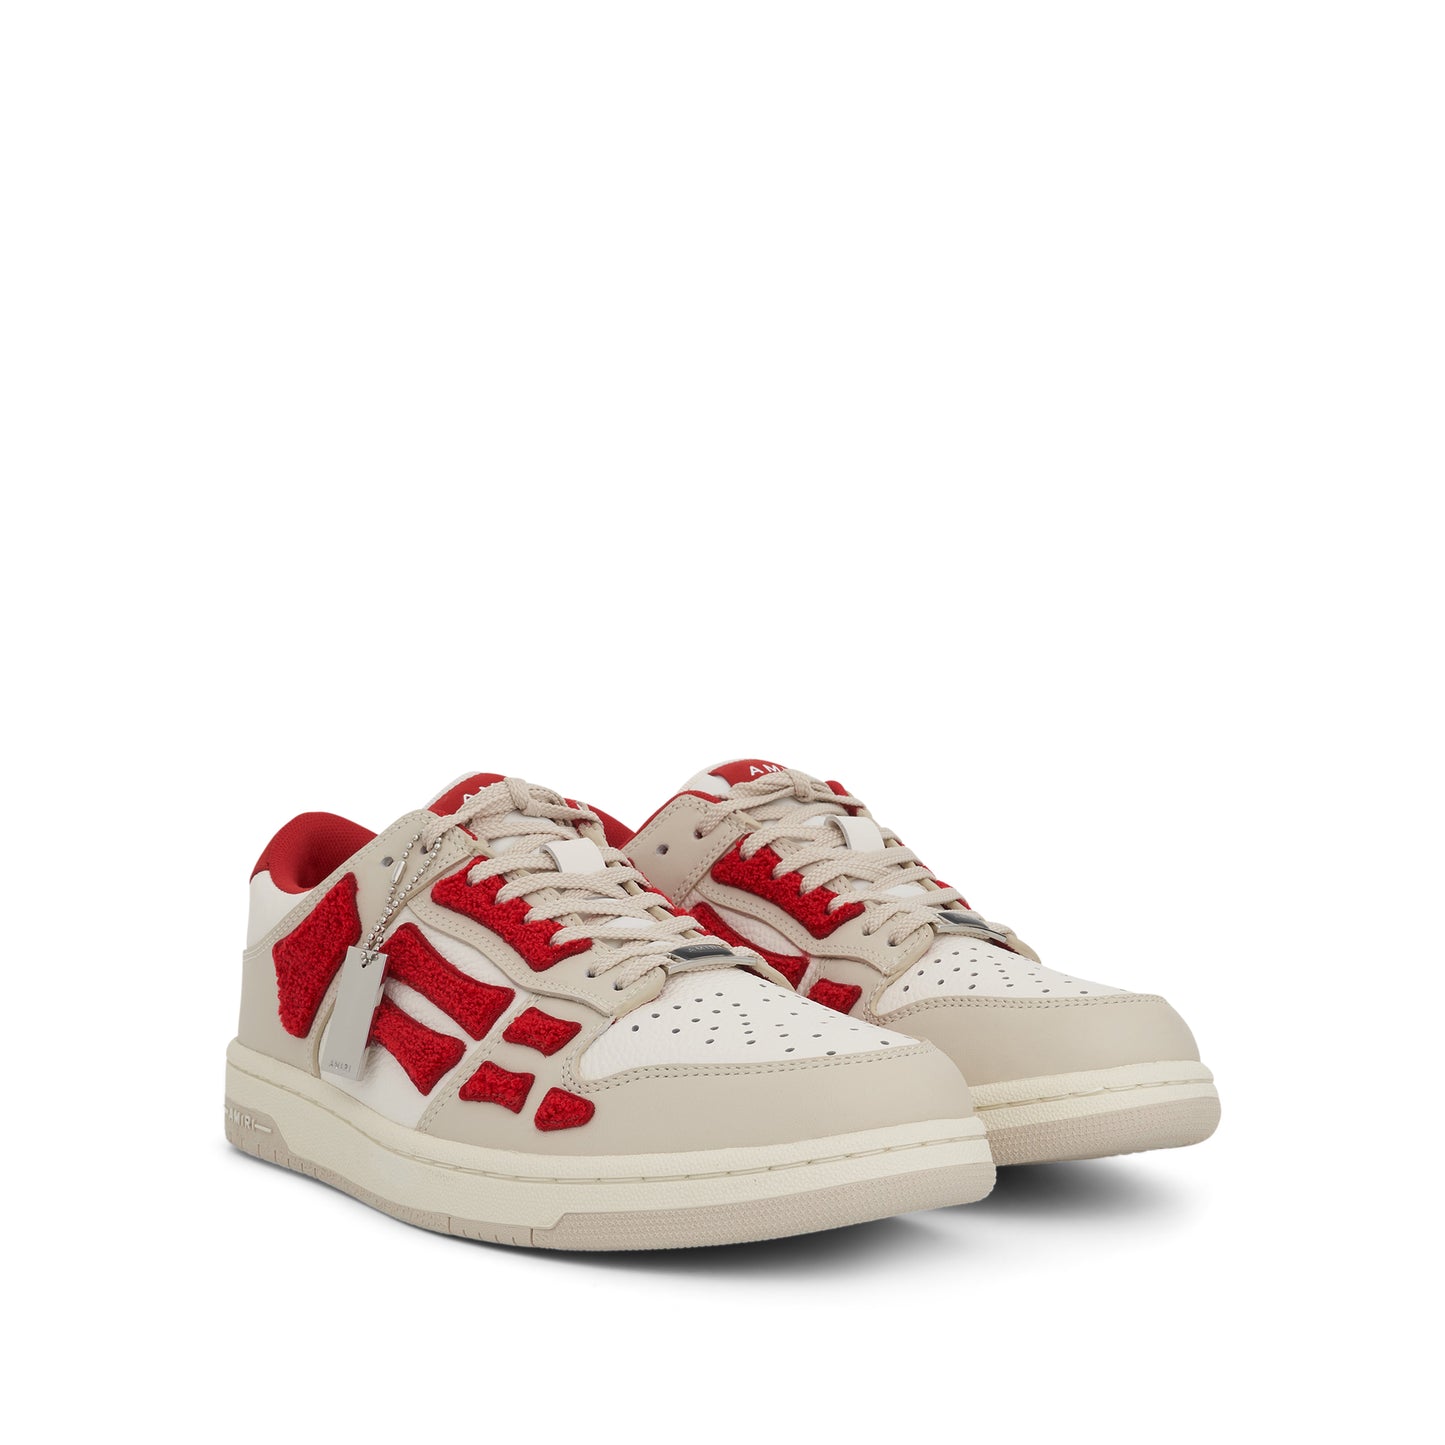 Skeleton Low Top Sneakers with Terrycloth in Red